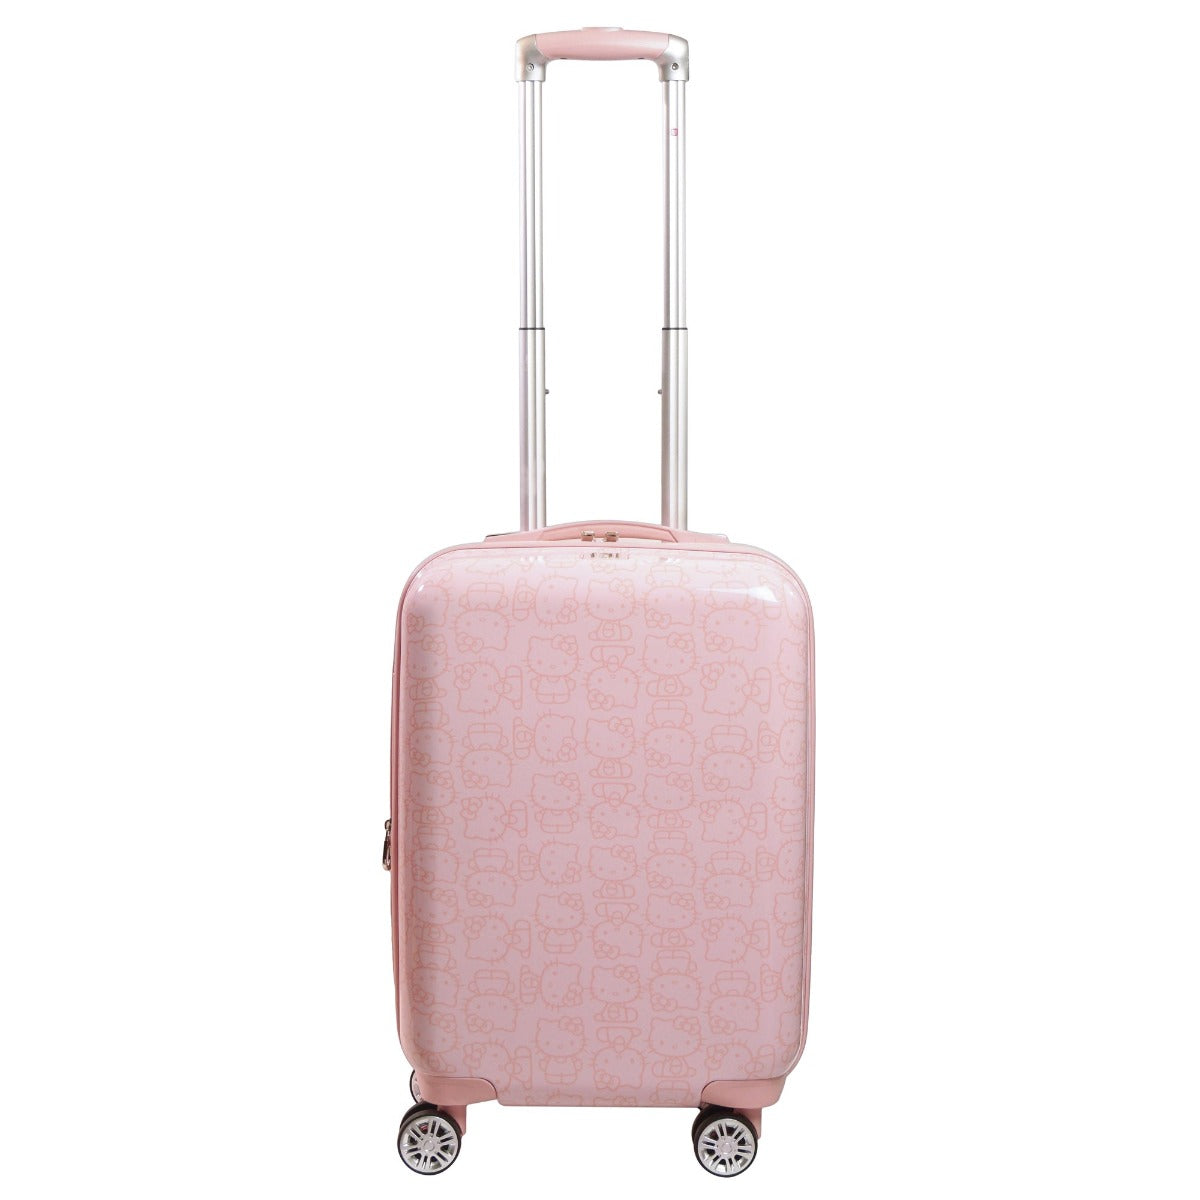 Hello Kitty Pose All Over Print 21" Hardsided Luggage Pink Carry-on Spinner Suitcase